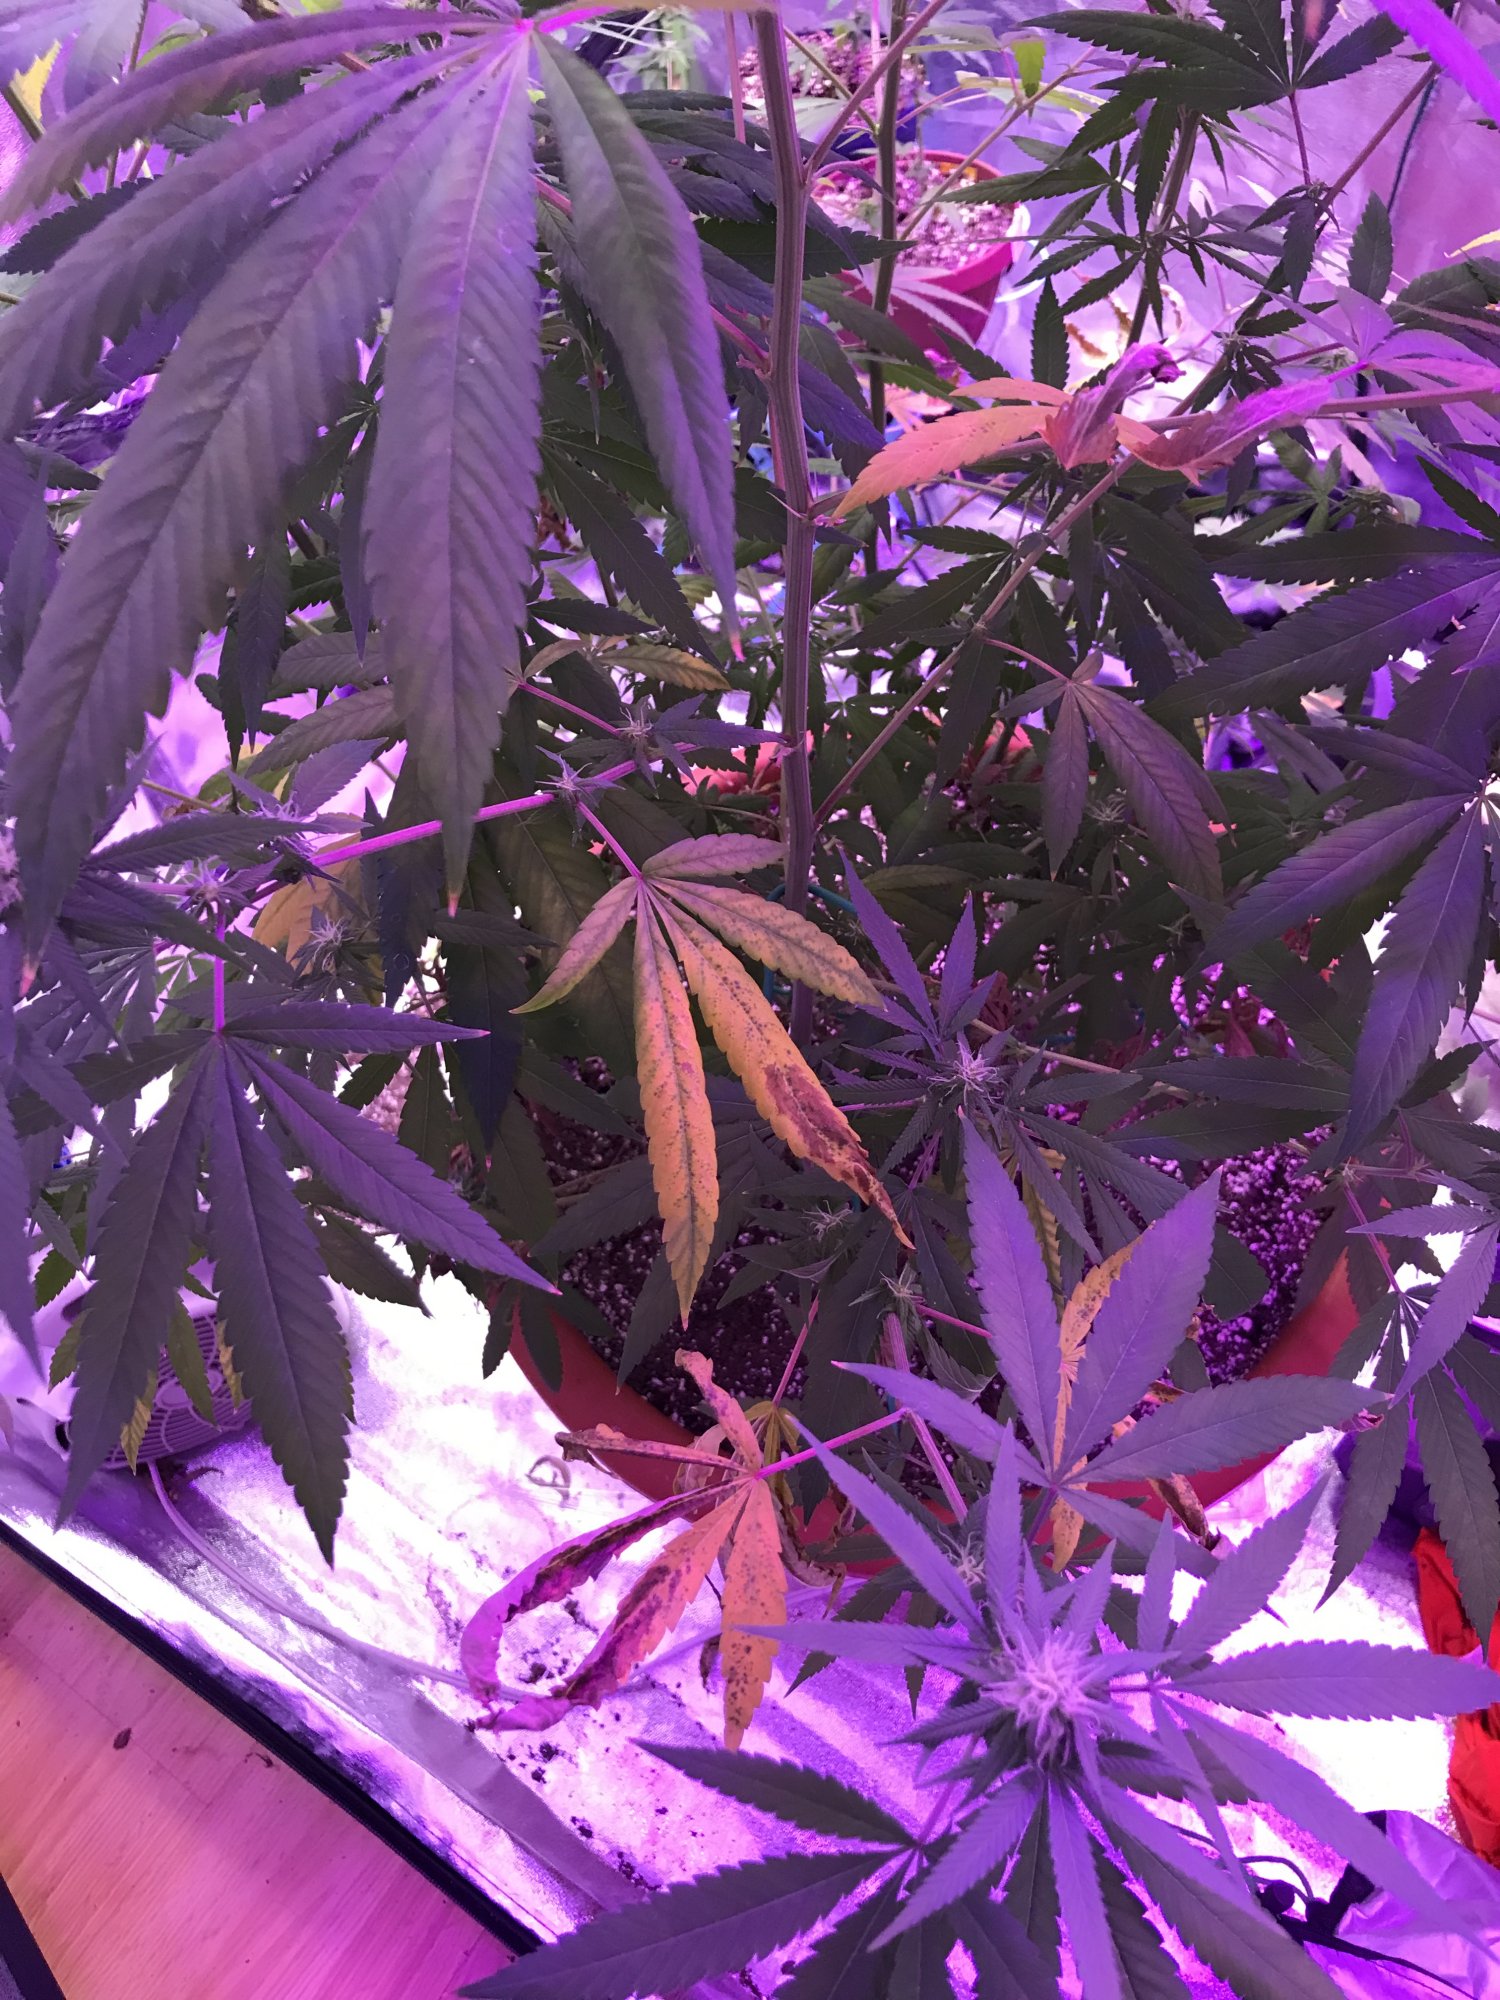 Nutrient burn or heat stress not sure what to do 7